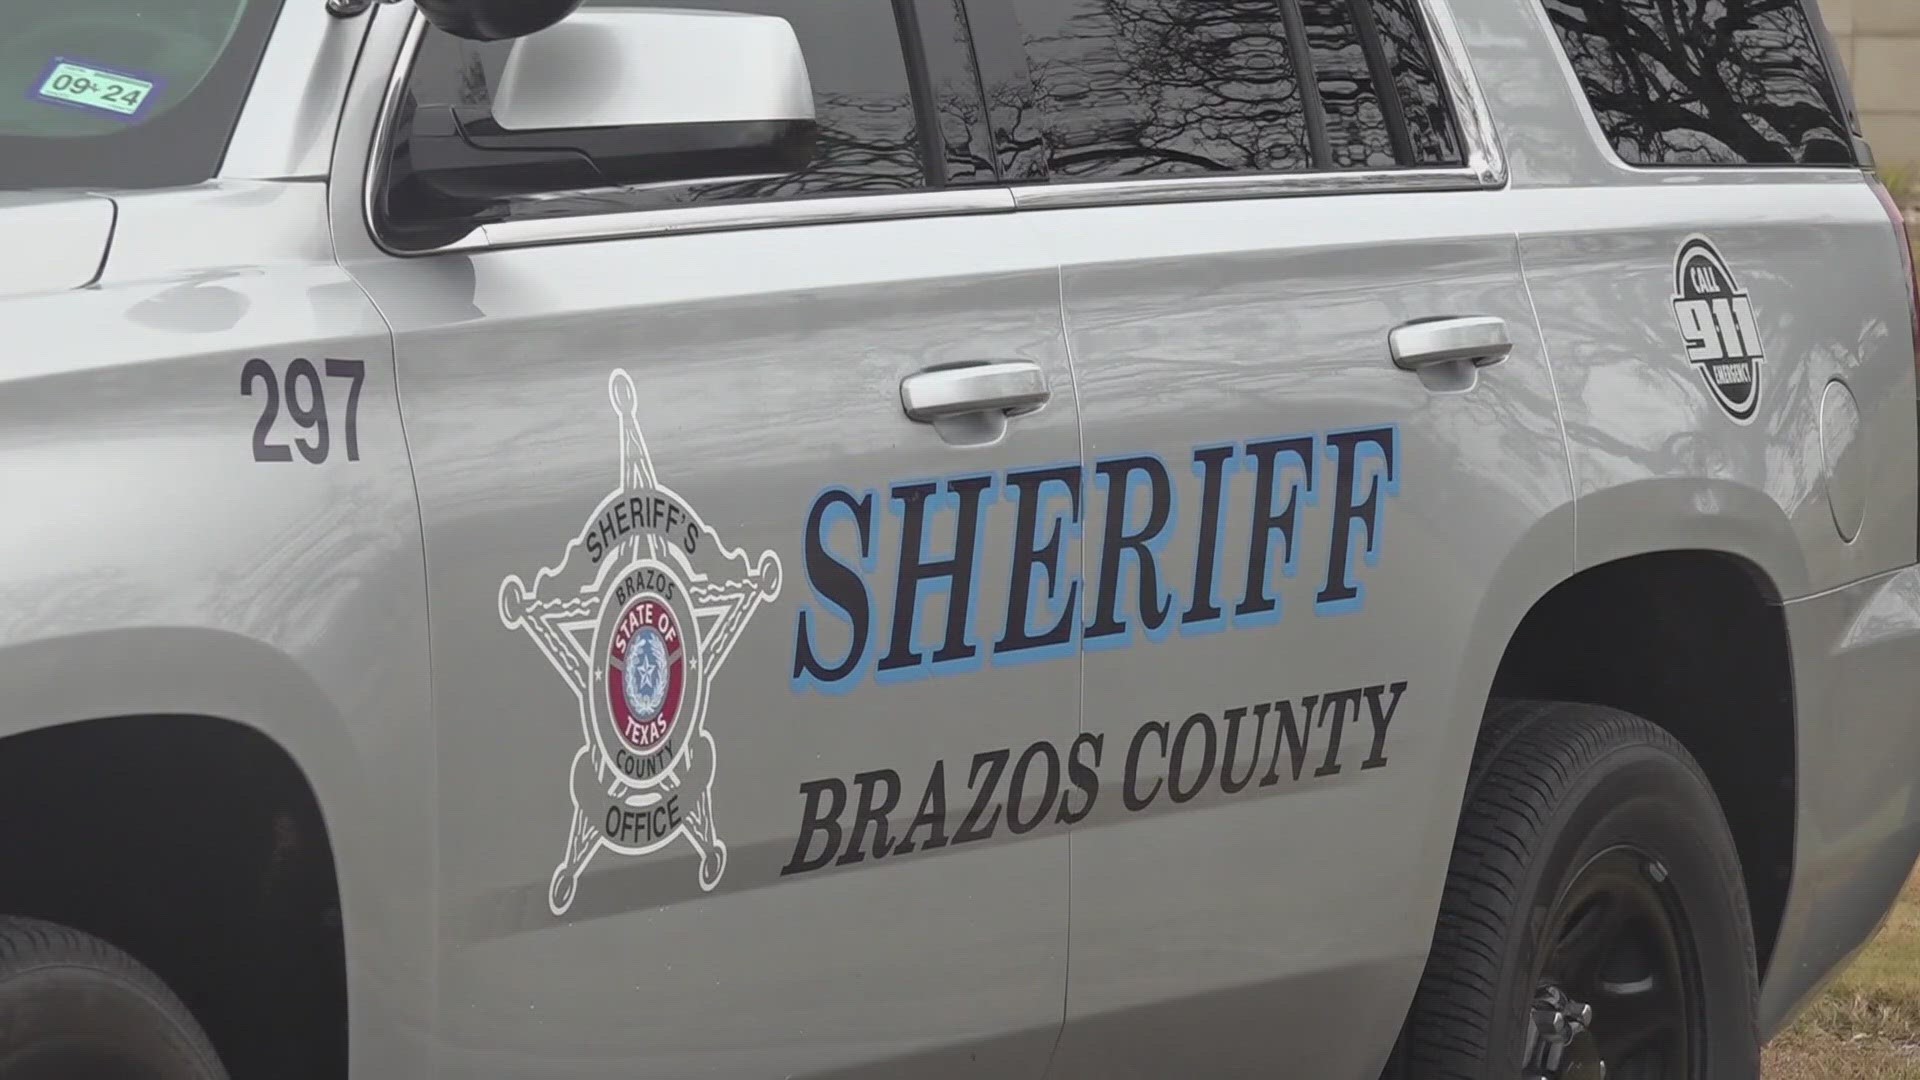 Bryan PD officials and the Brazos County Sheriff's Office wants residents to be safe and smart due to an increase in vehicle burglaries in neighborhoods.